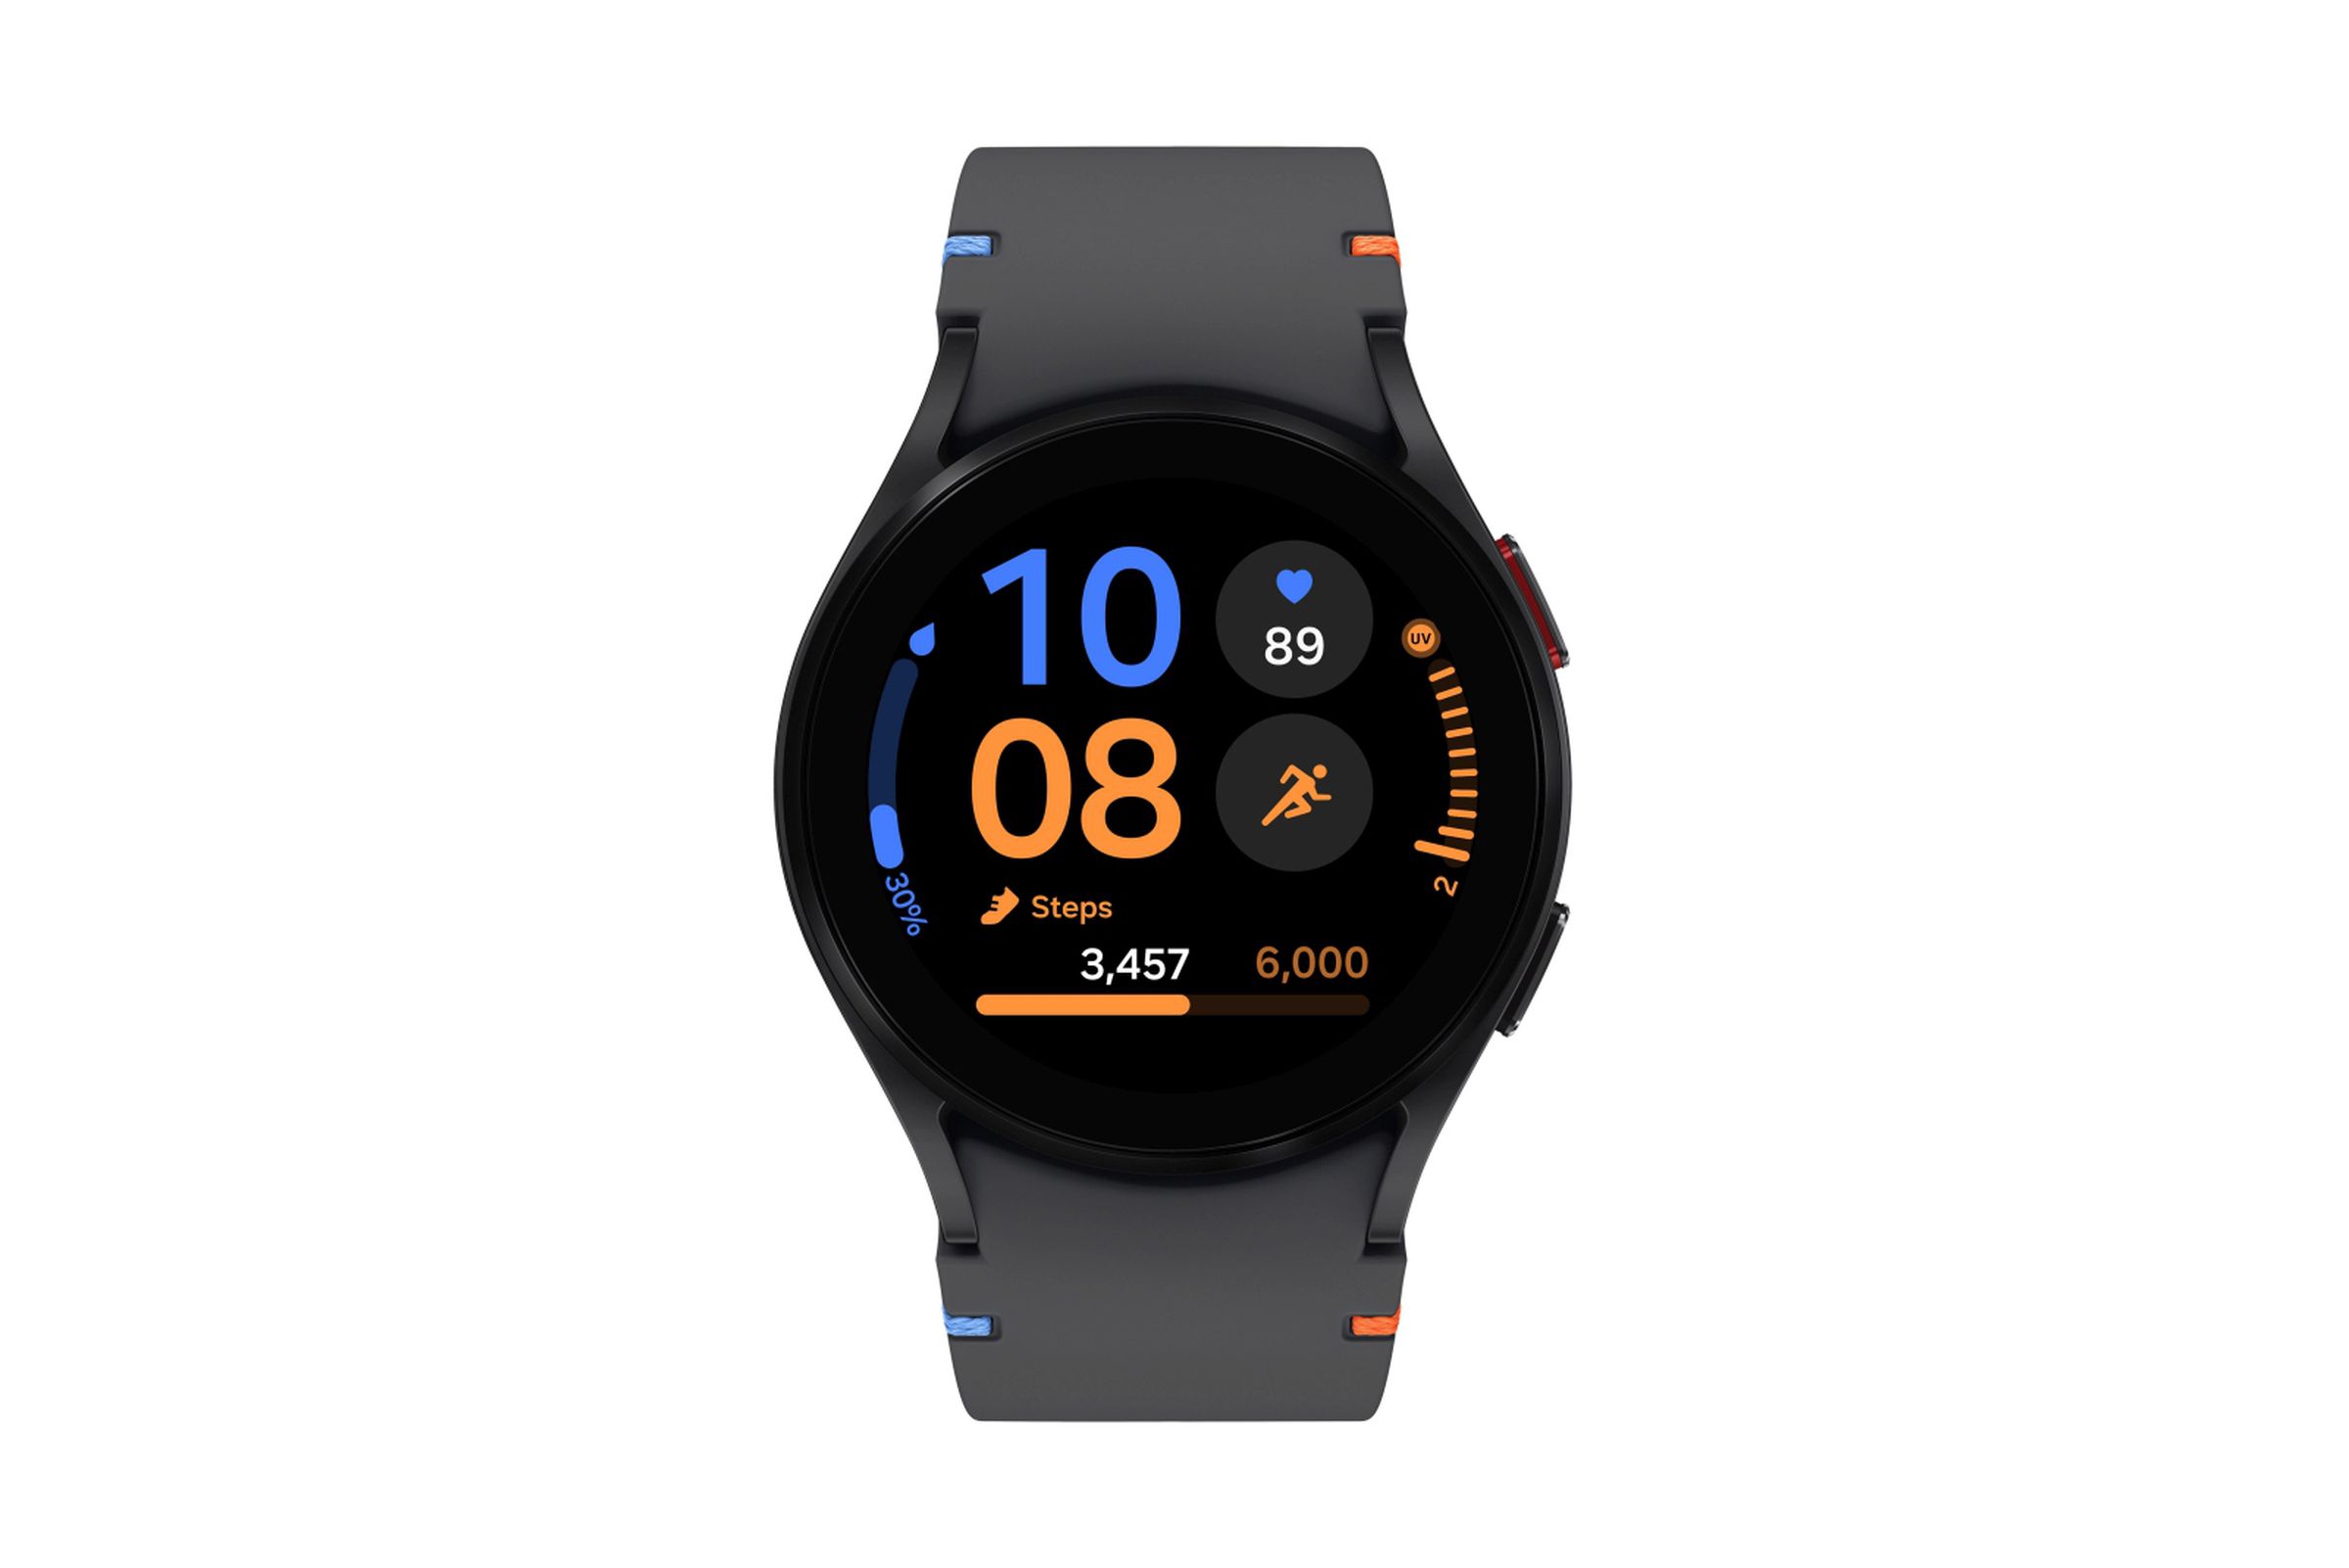 Galaxy Watch FE in black, light blue, and pink